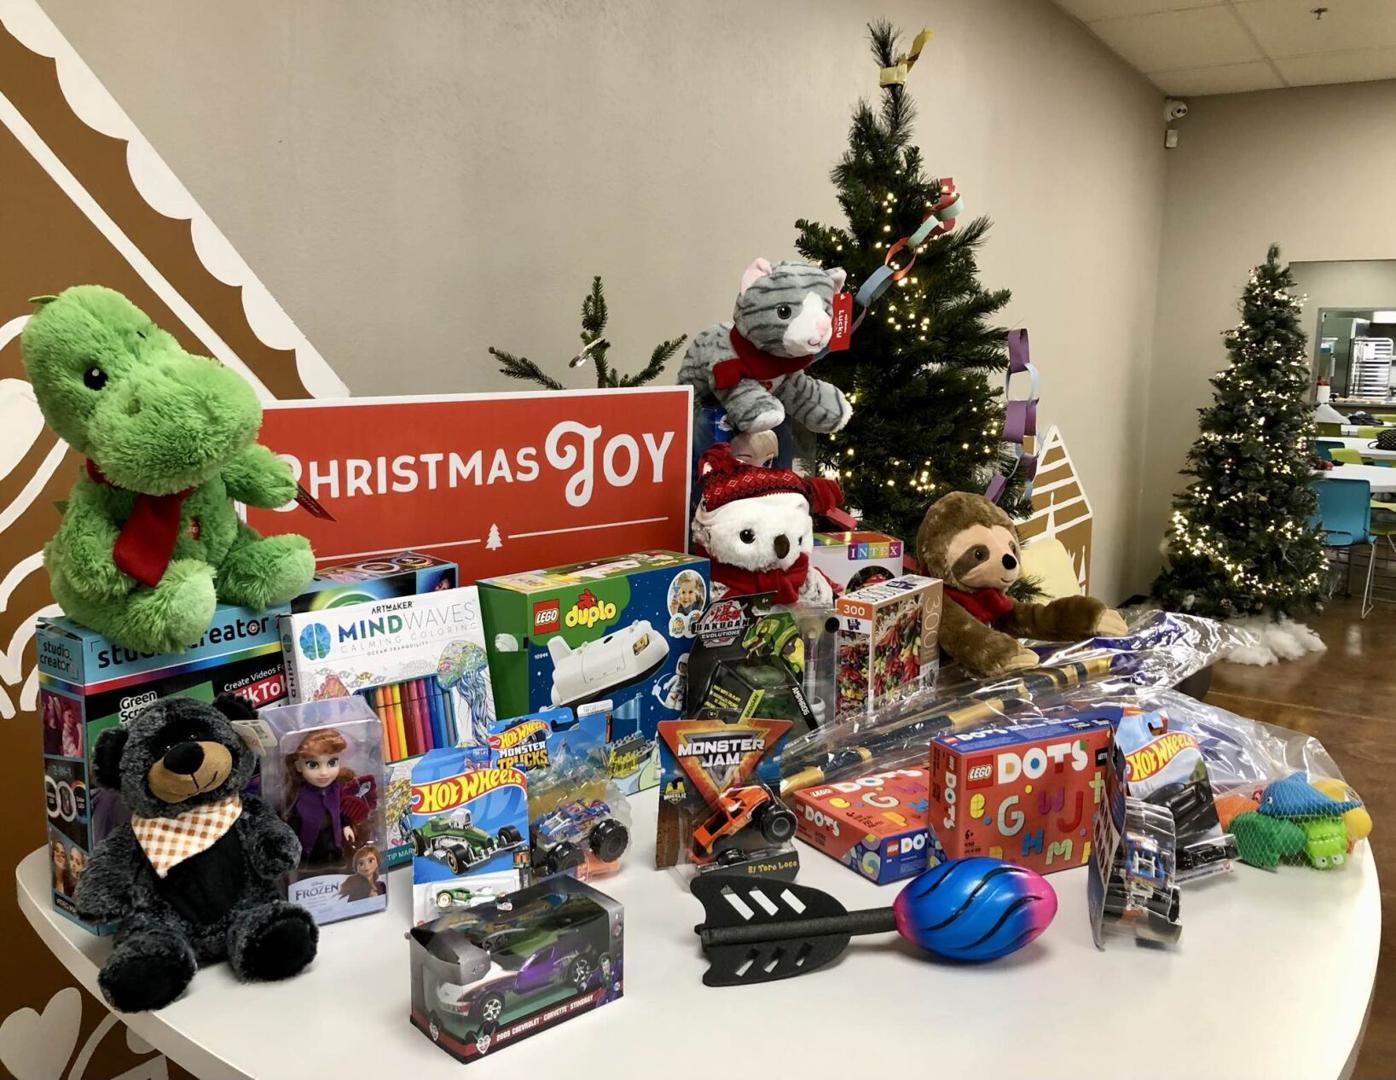 Christmas Gifts for Preschool Boys - Joy in the Works